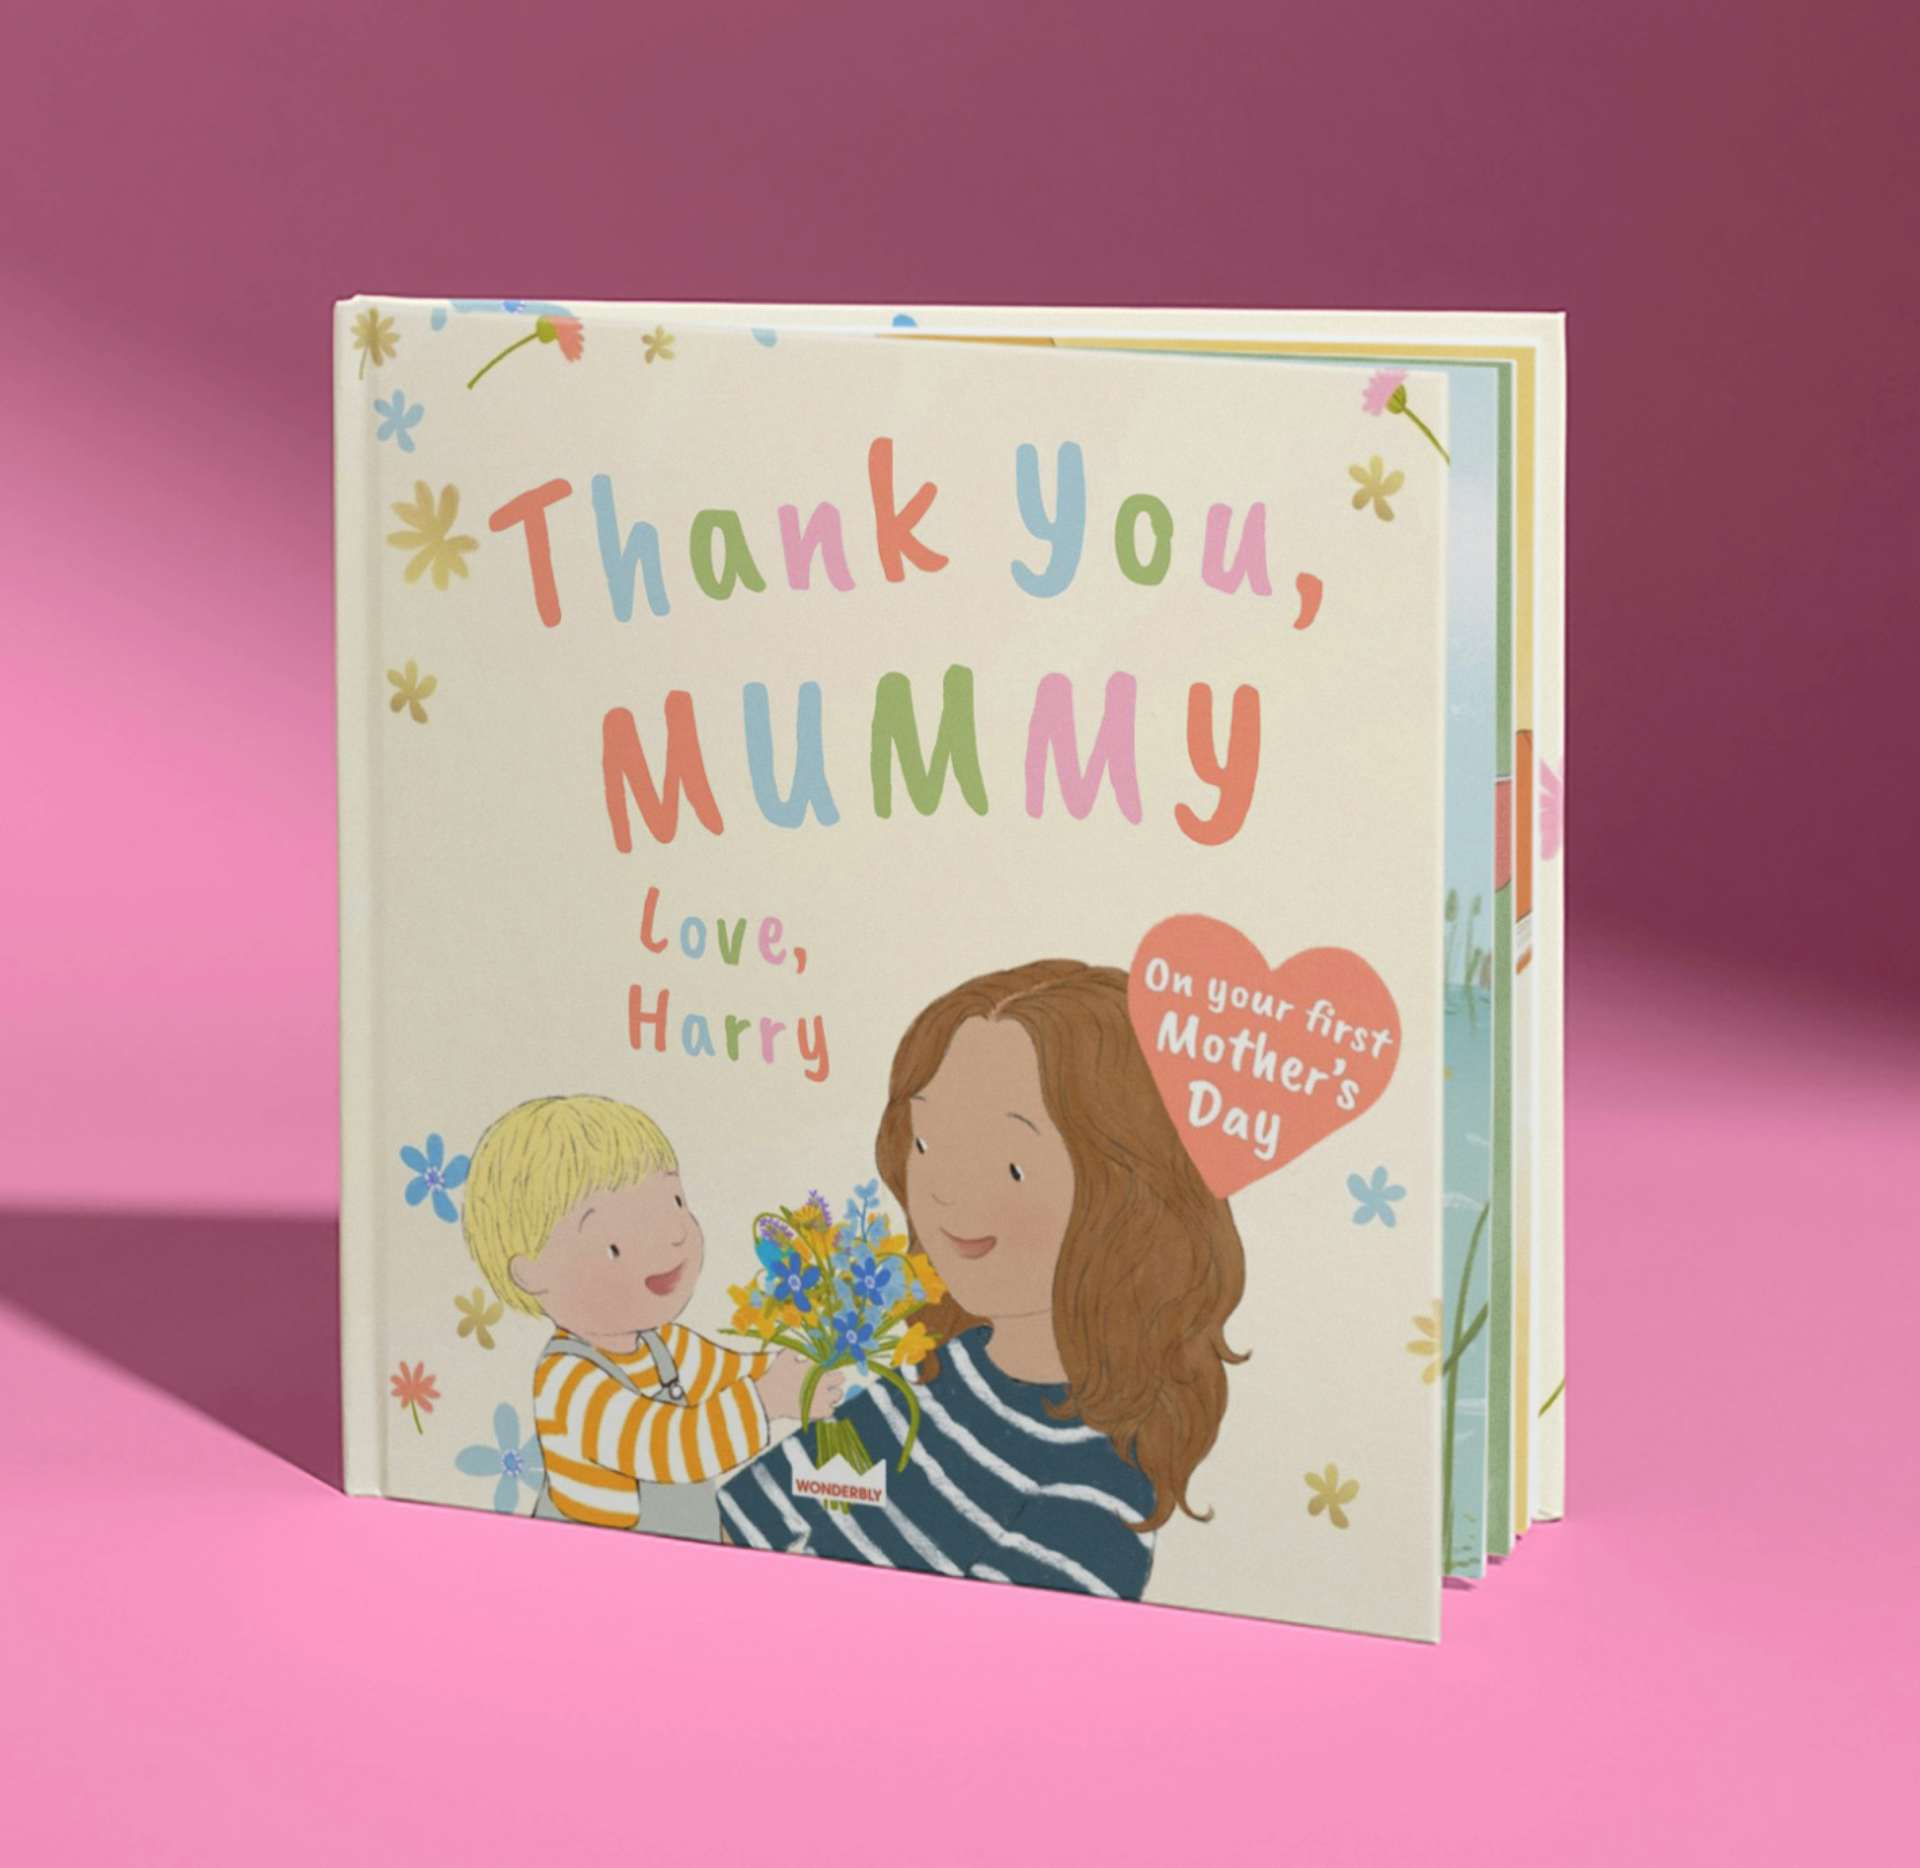 Thank you Mummy cover with first mother's day special cover